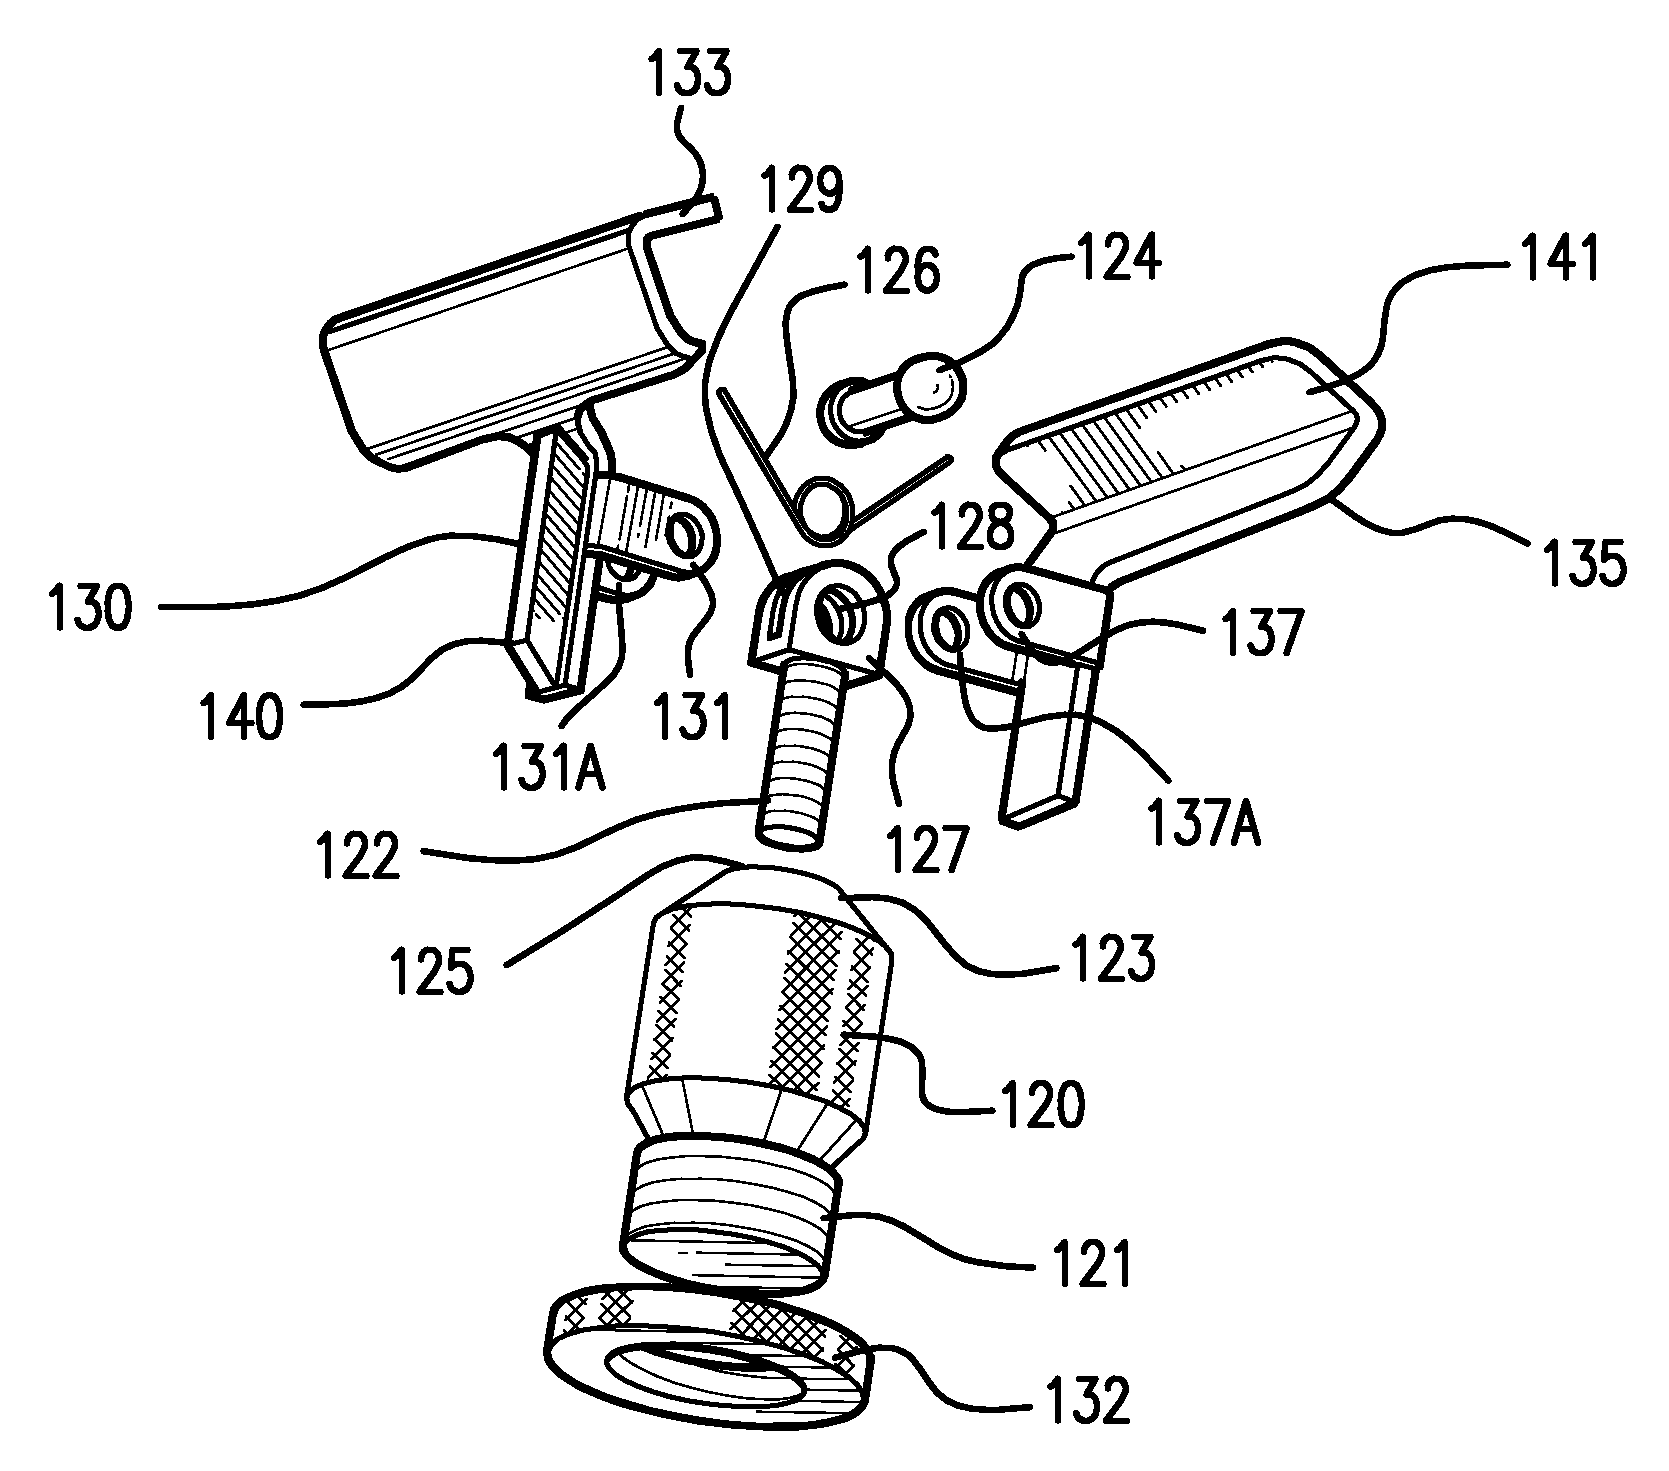 Attachment Apparatus for Studio Equipment and the Like